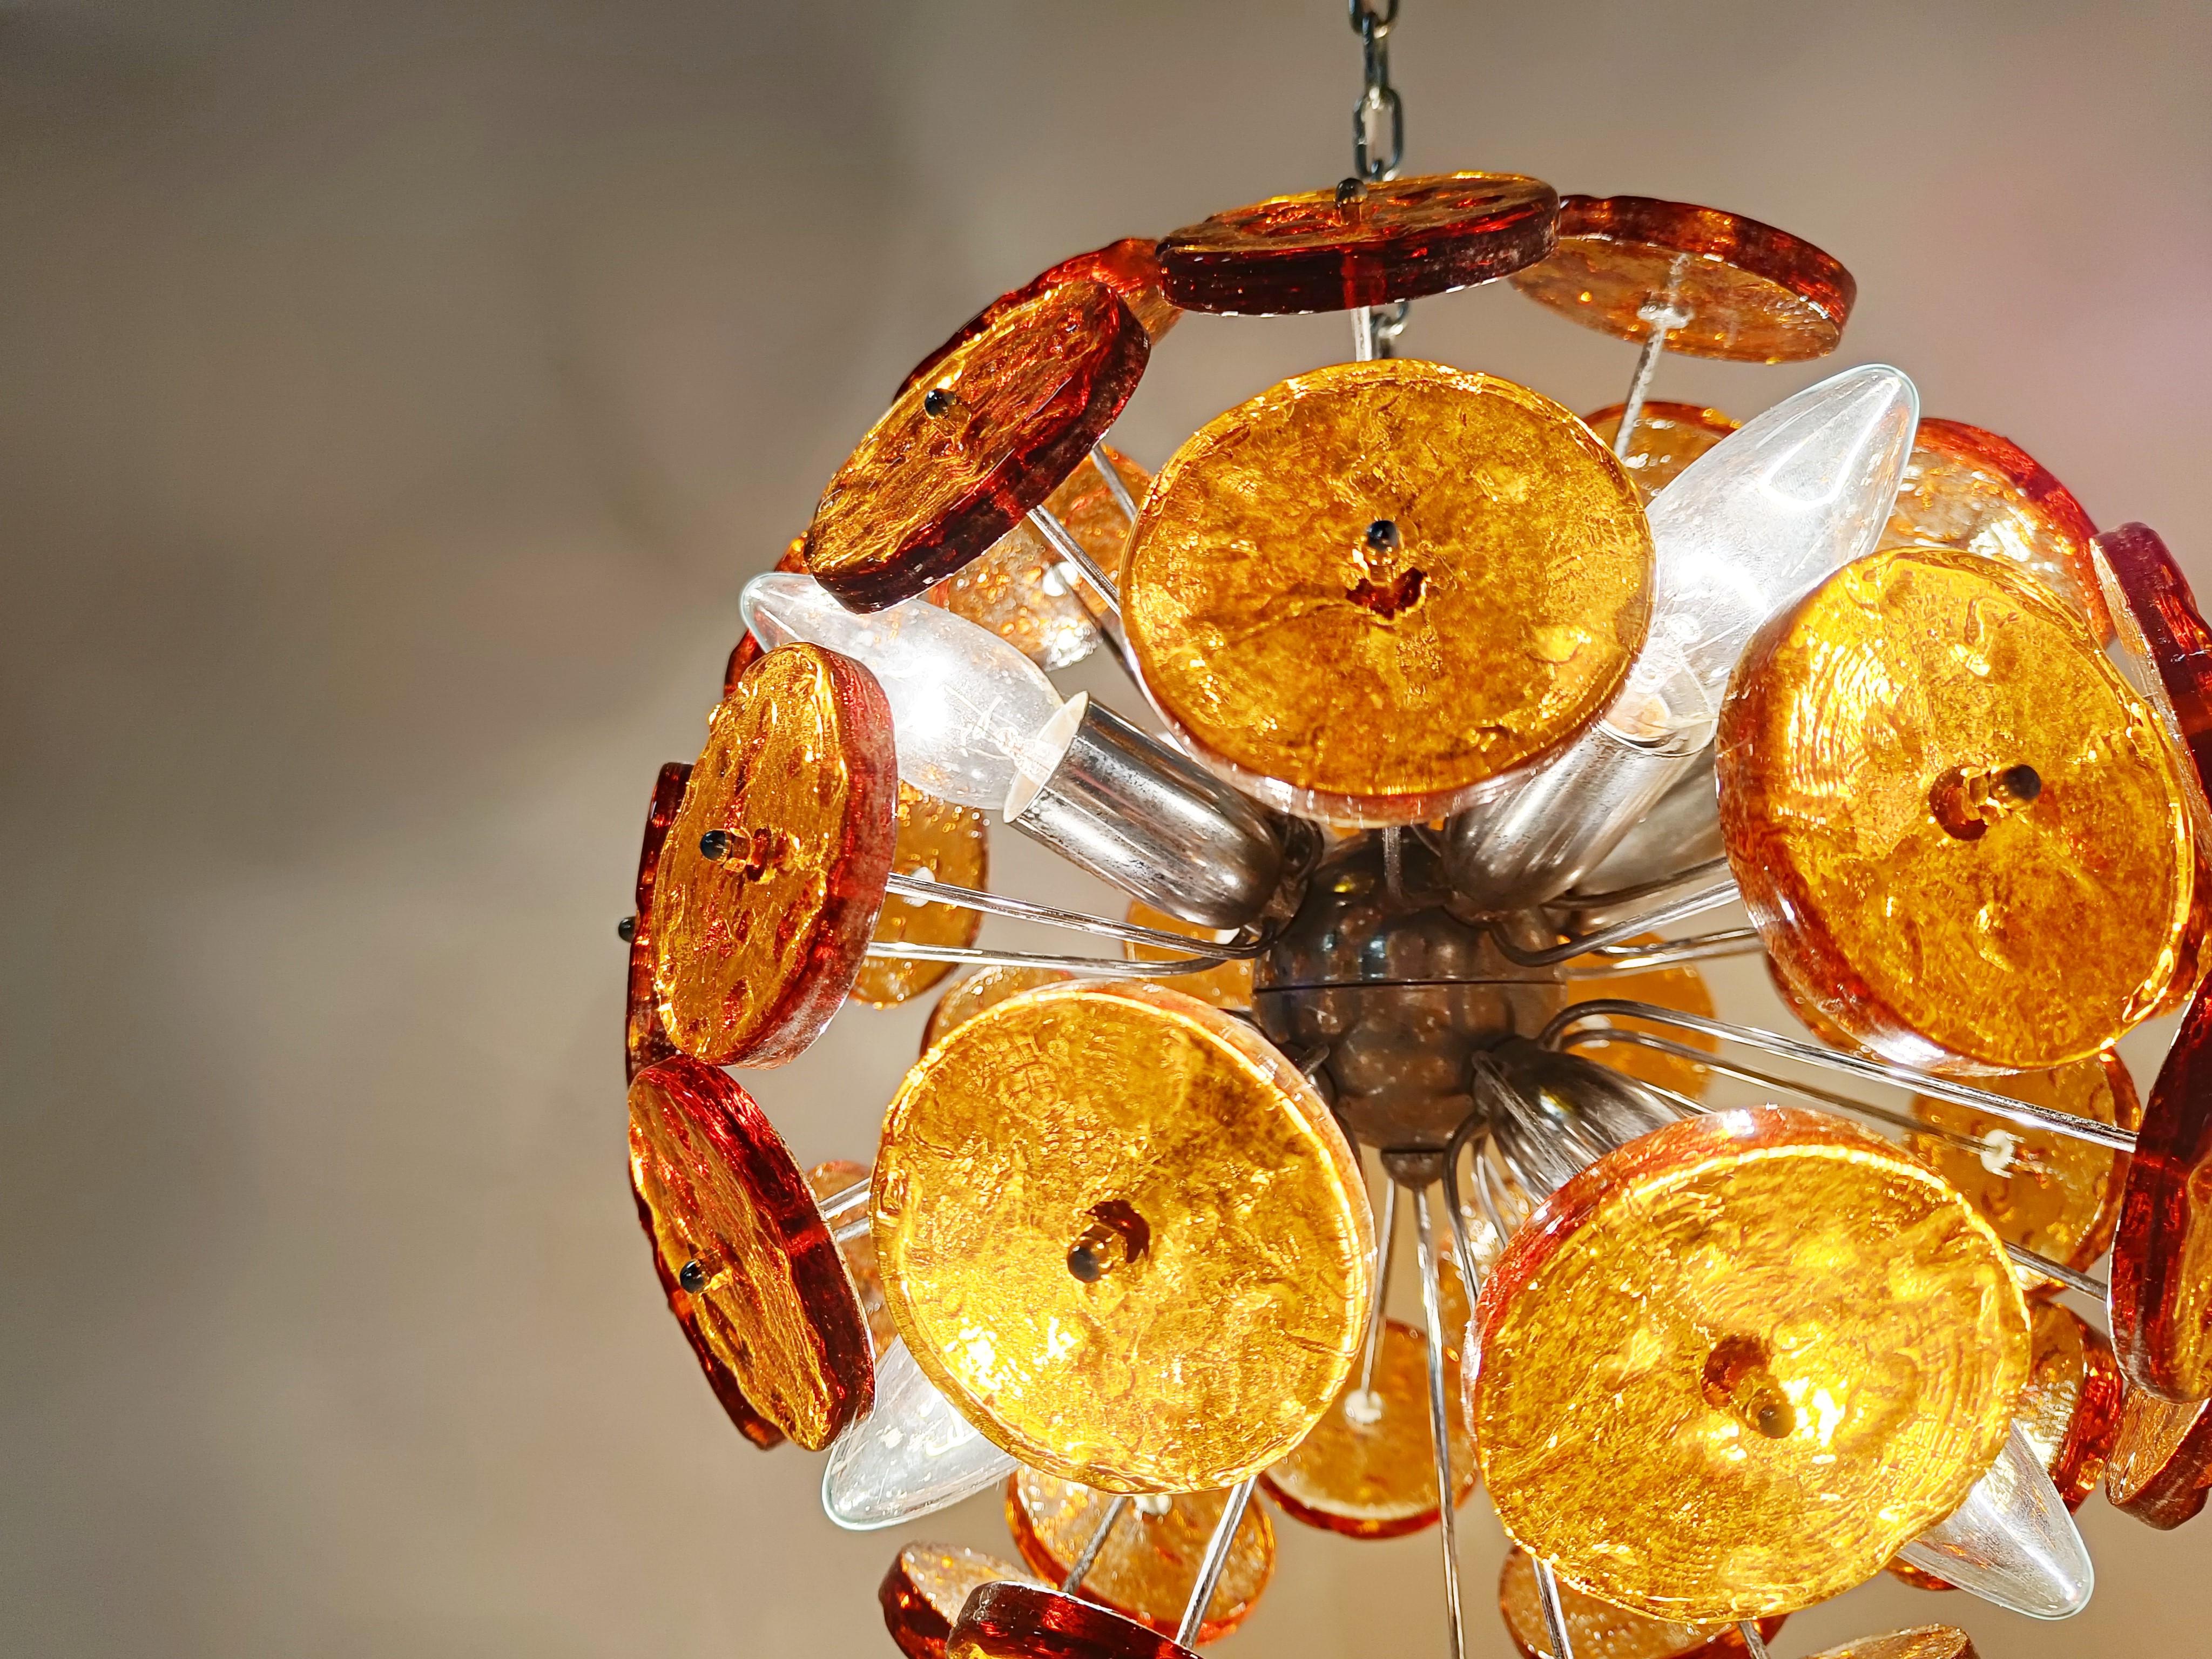 Striking sputnik shaped chandelier with brown/amber coloured murano glass discs mounted on a chrome frame.

Once illuminated, this beautiful chandelier emits a warm diffuse light.

Tested and ready to use.

We can change the chain lenght if